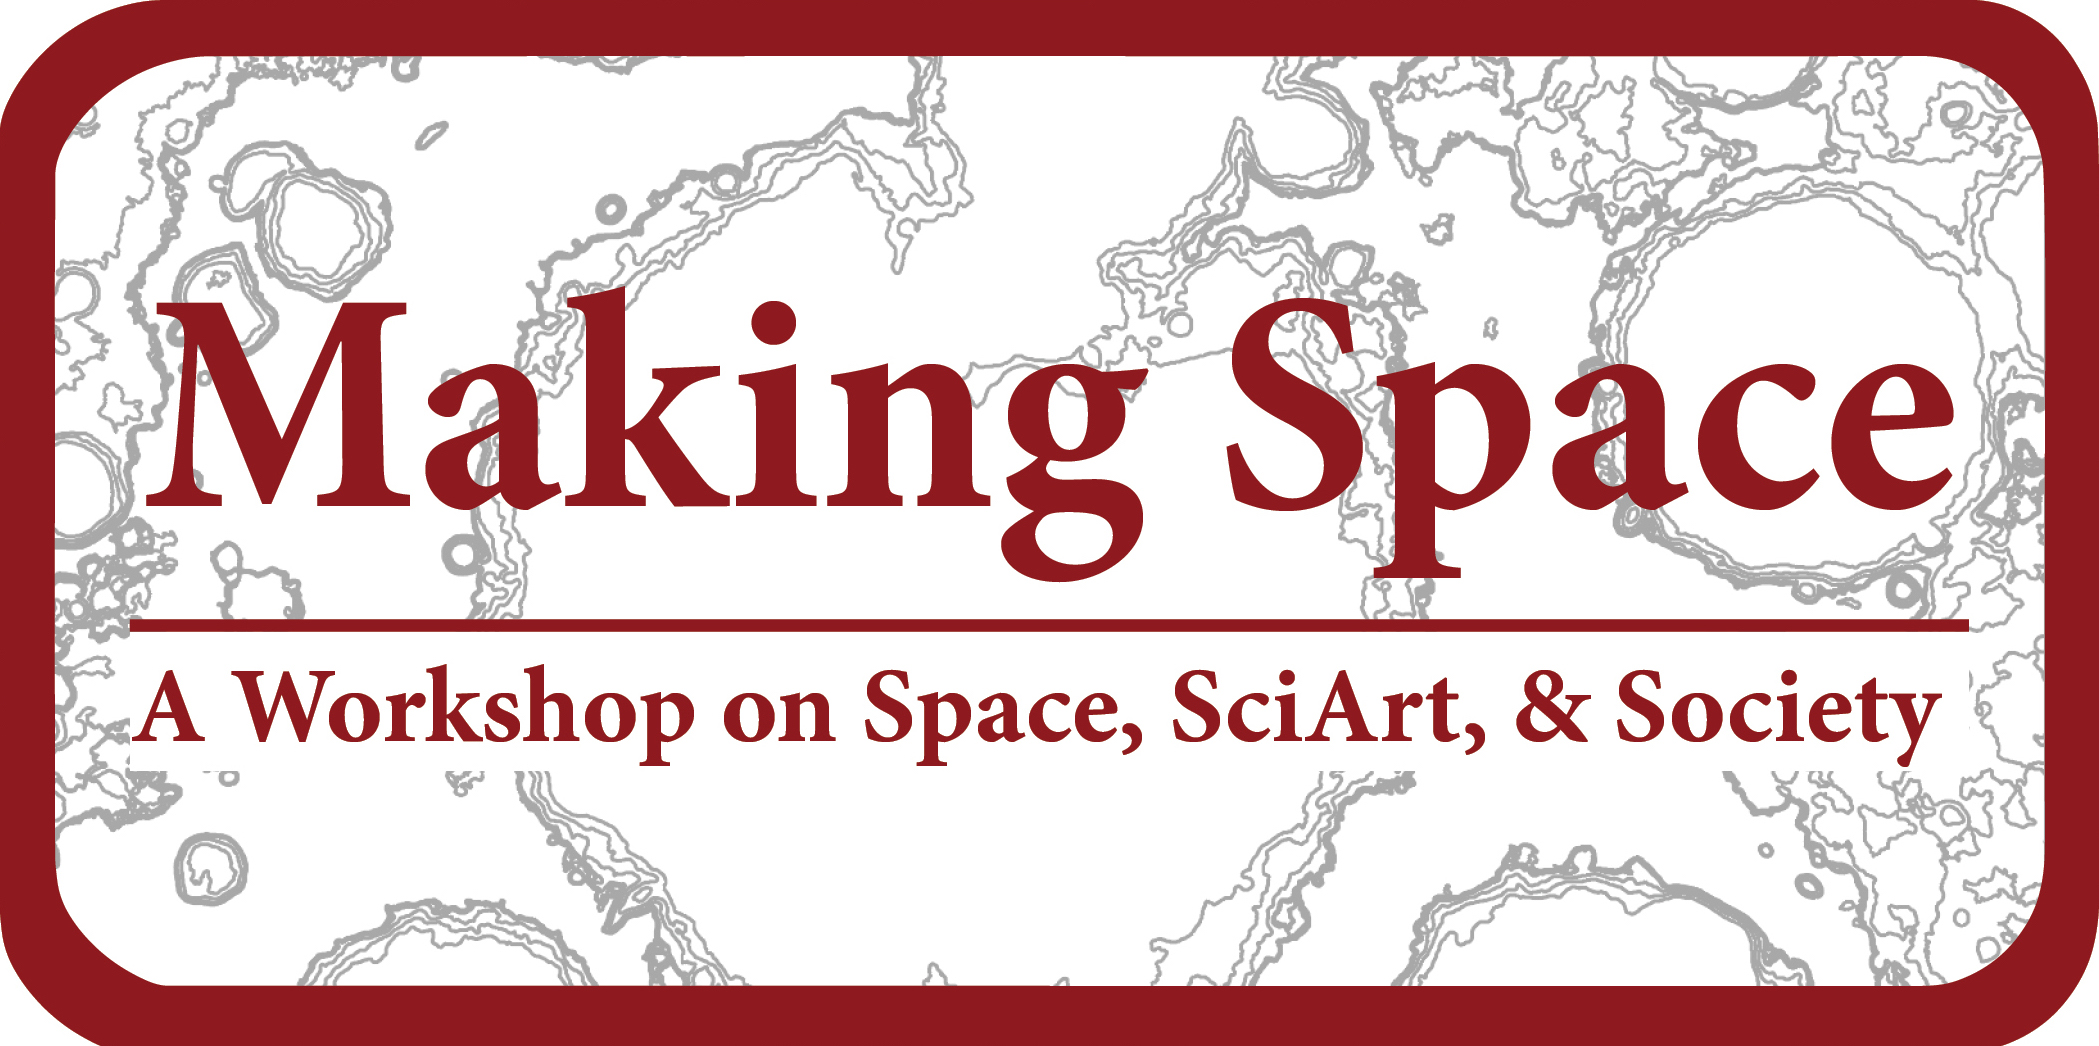 "Making Space: A Workshop on Space, SciArt, & Society"